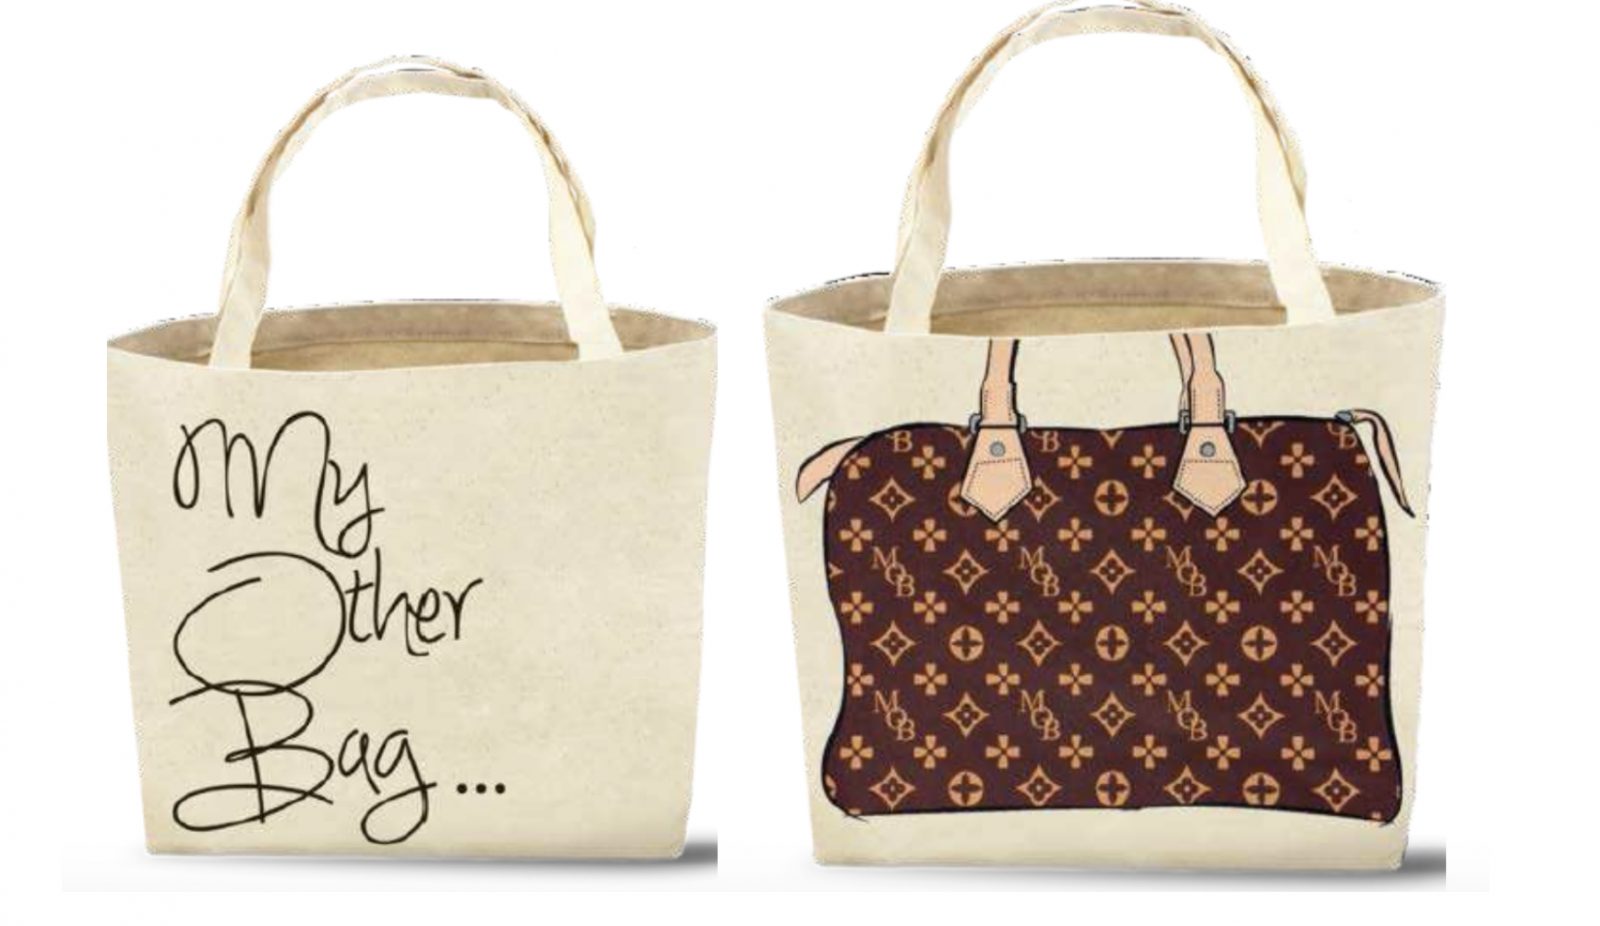 Louis Vuitton Has Slapped My Other Bag with a Major Lawsuit - The Fashion  Law